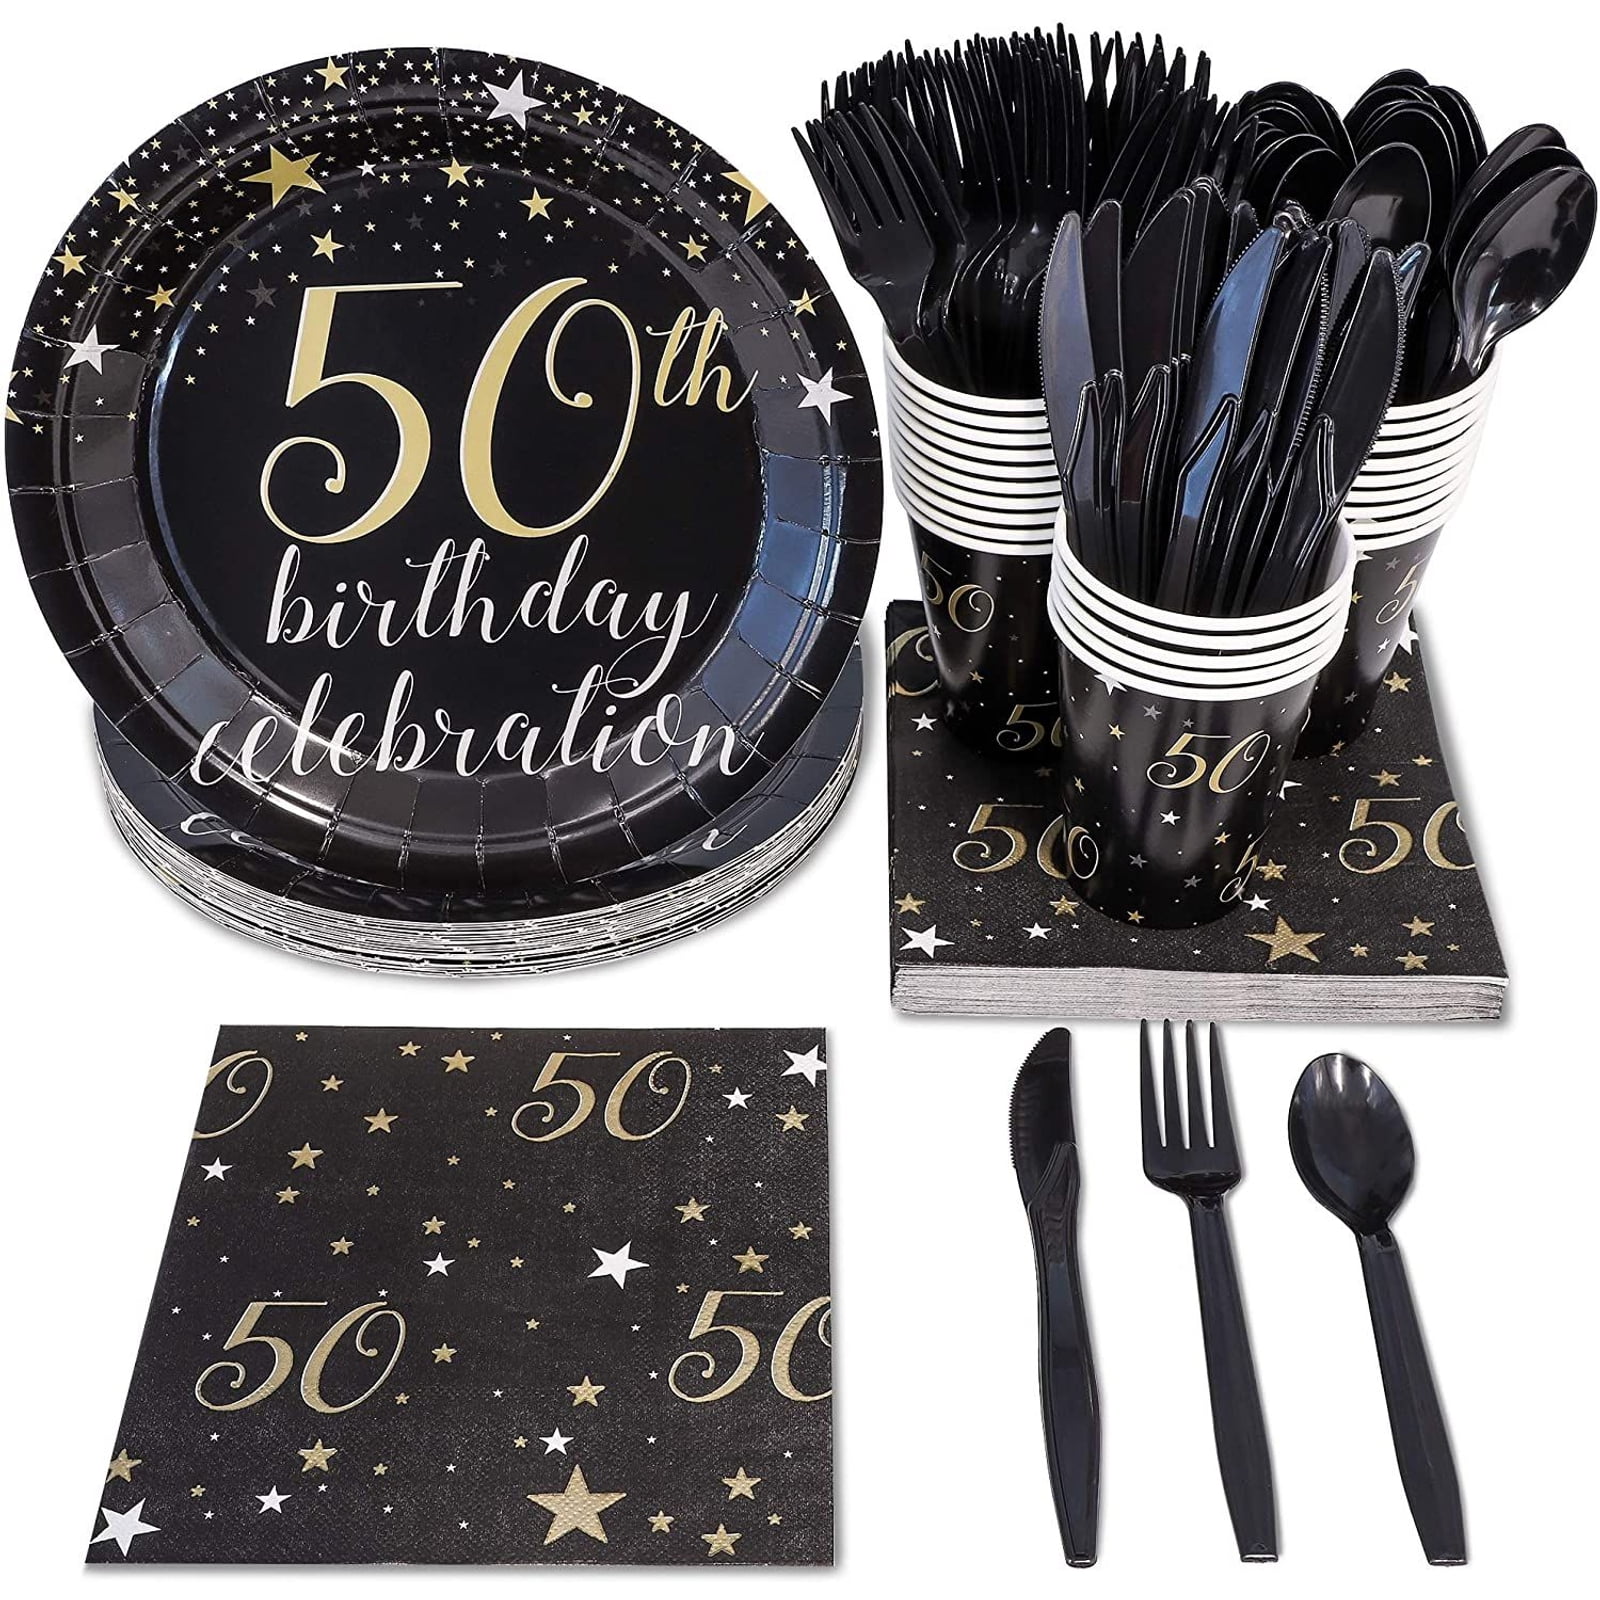 Black and Gold Party Supplies Disposable Black Party Plates Tableware Napkins Cups Cutlery Banner for Cocktail 20s Party 18th 50th 70th Birthday Graduation Plates Gold Black Paper Plates 24 Guests